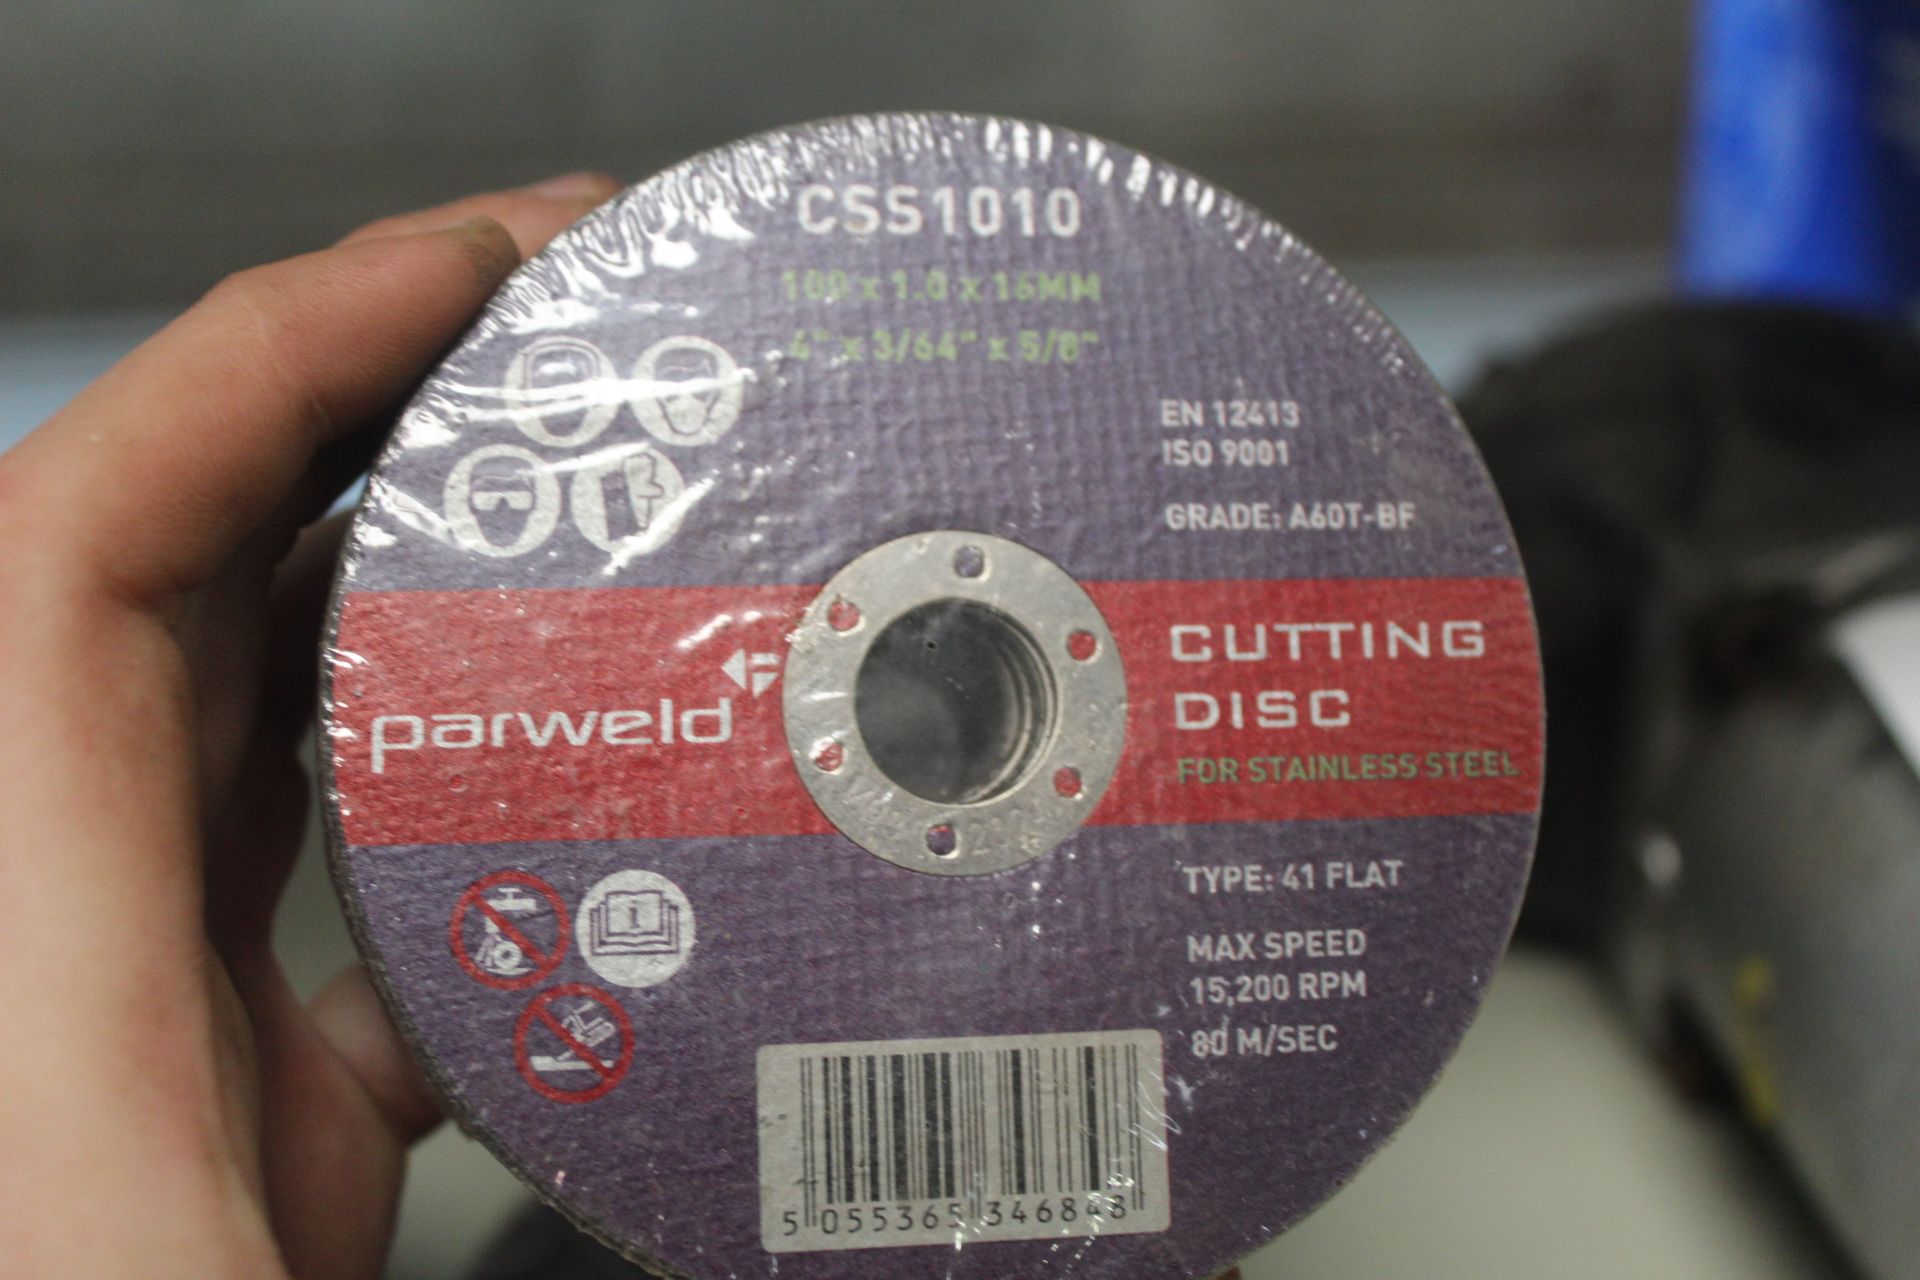 100x 1mm cutting discs. - Image 2 of 2